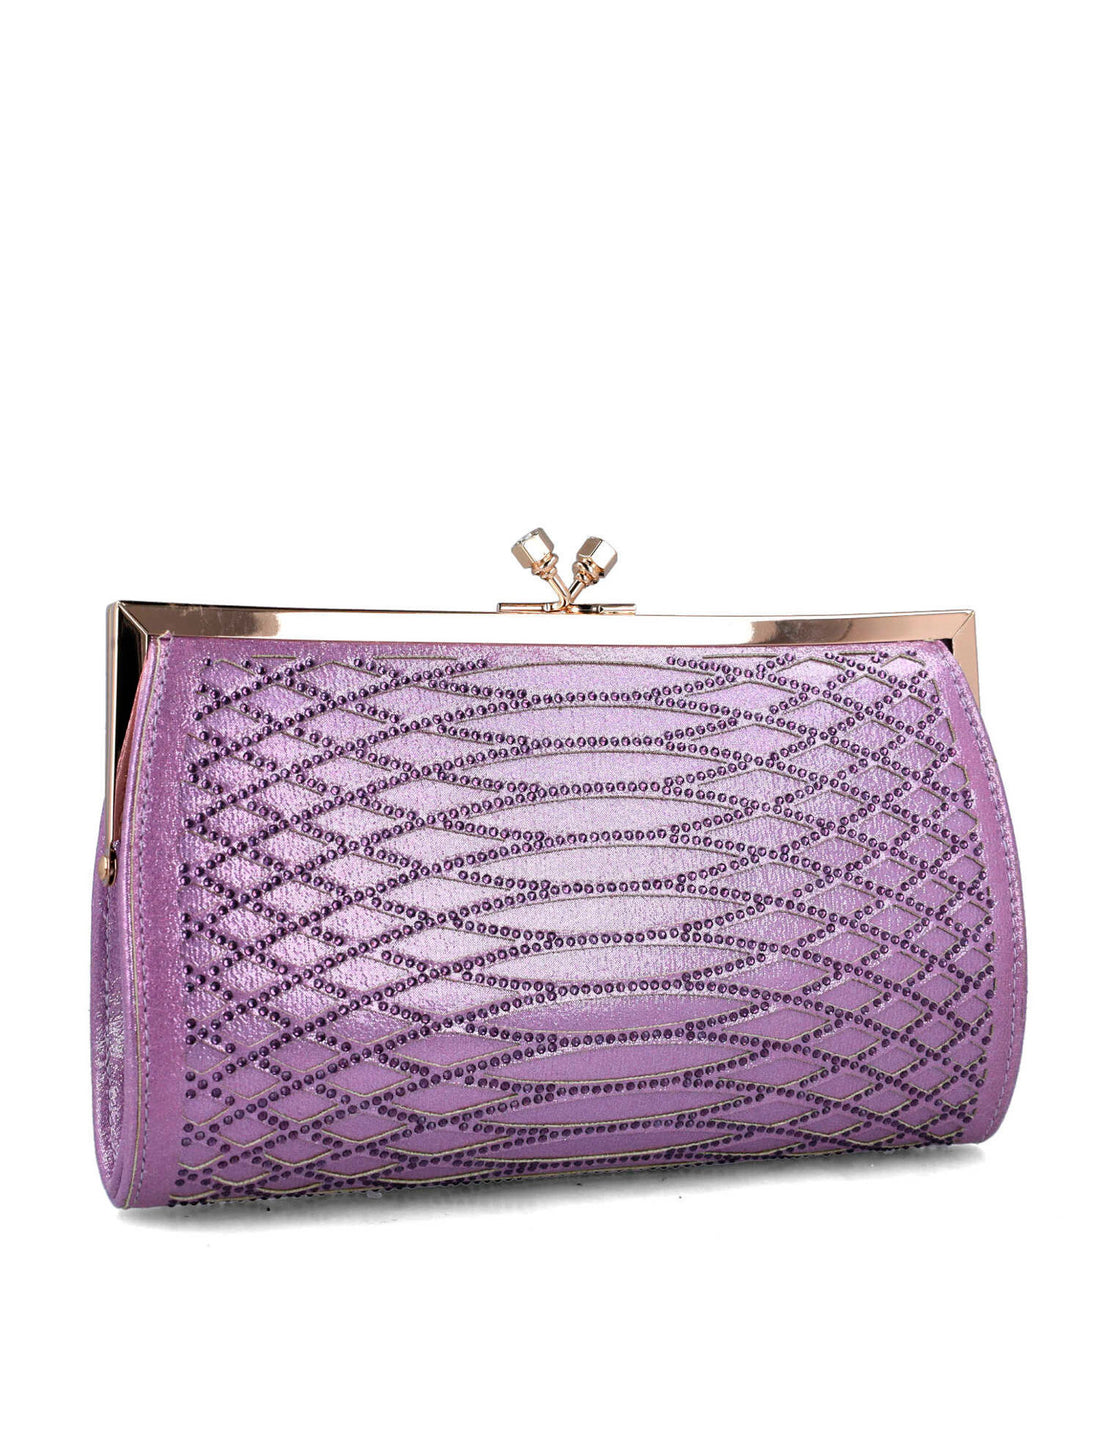 Purple Clutch In Imitation Snake Leather_85597_80_02